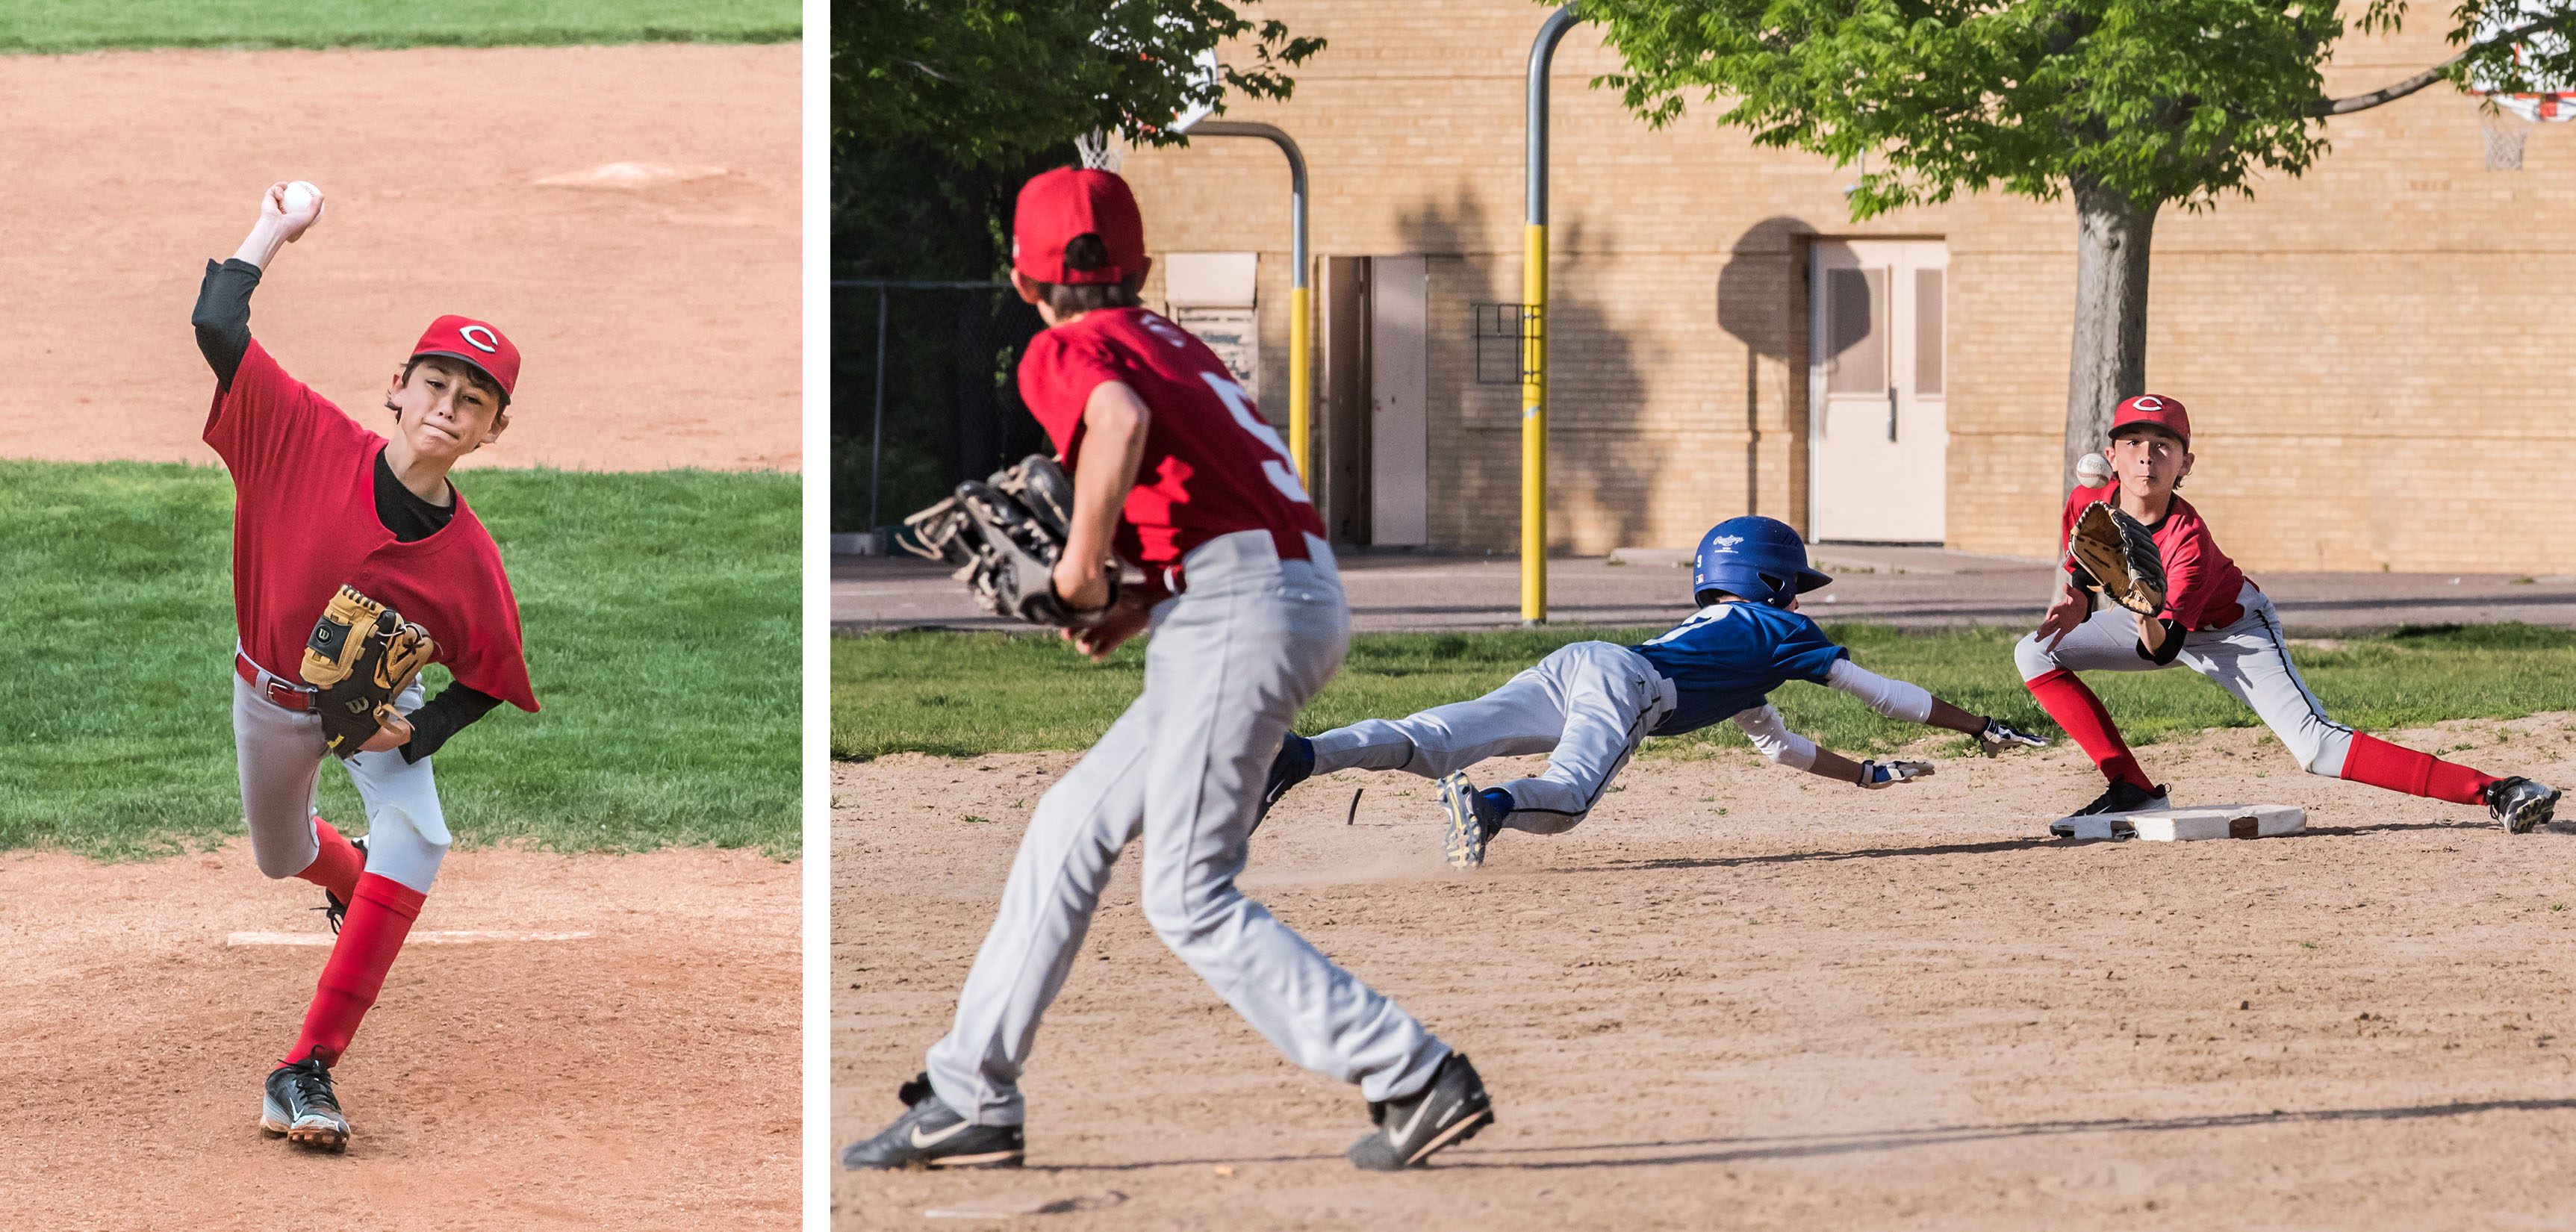 Two youth sports baseball photos.